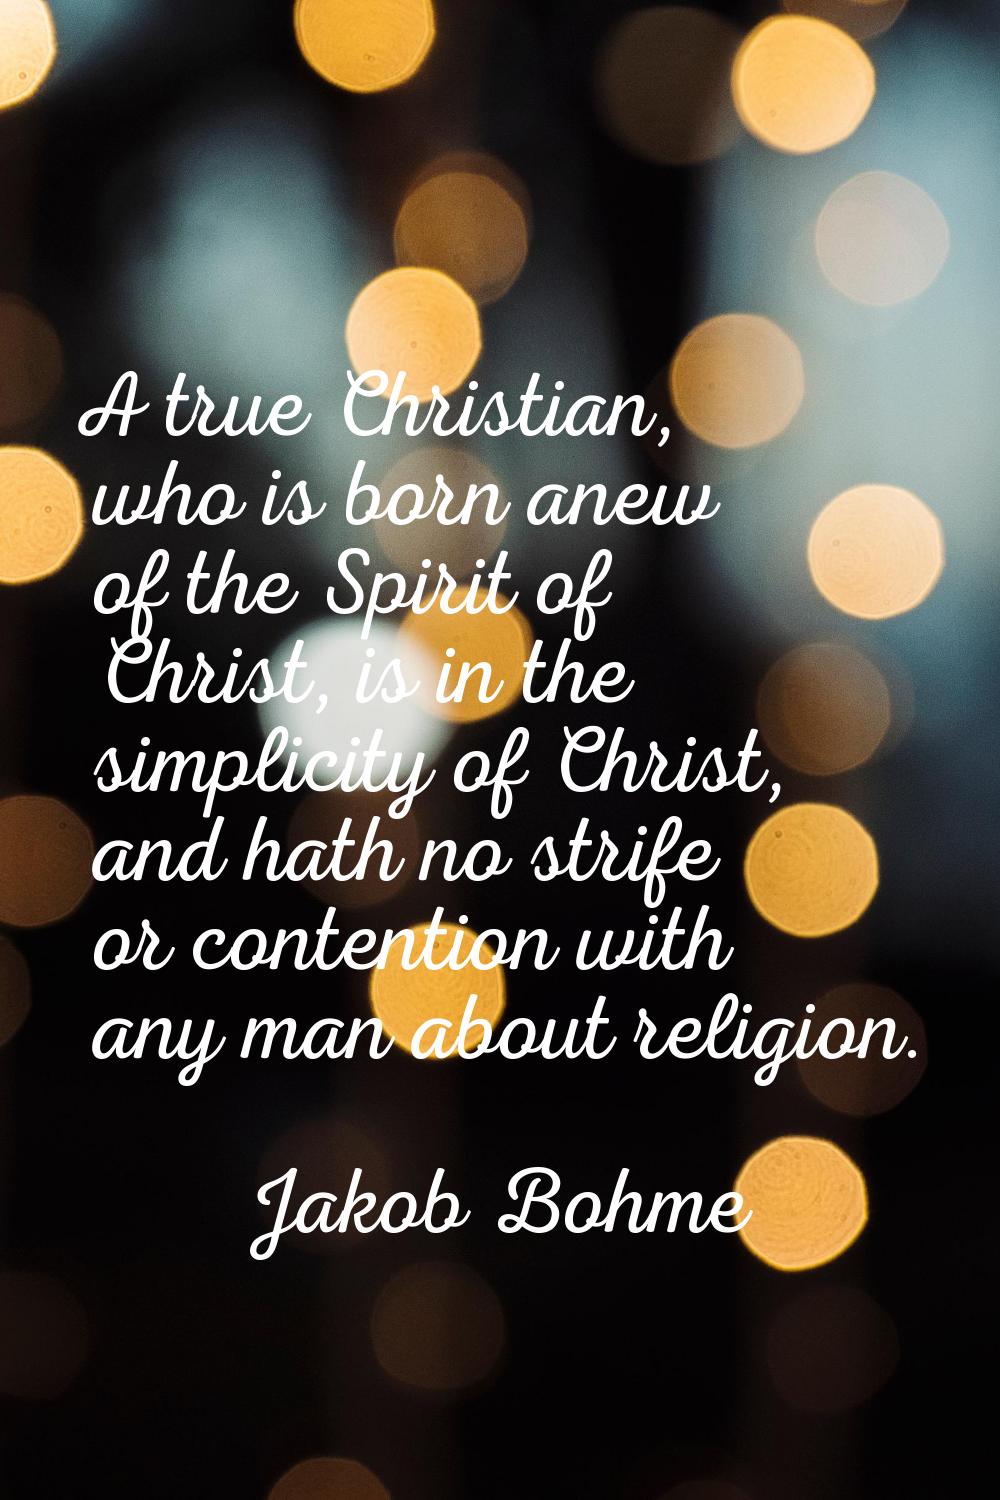 A true Christian, who is born anew of the Spirit of Christ, is in the simplicity of Christ, and hat